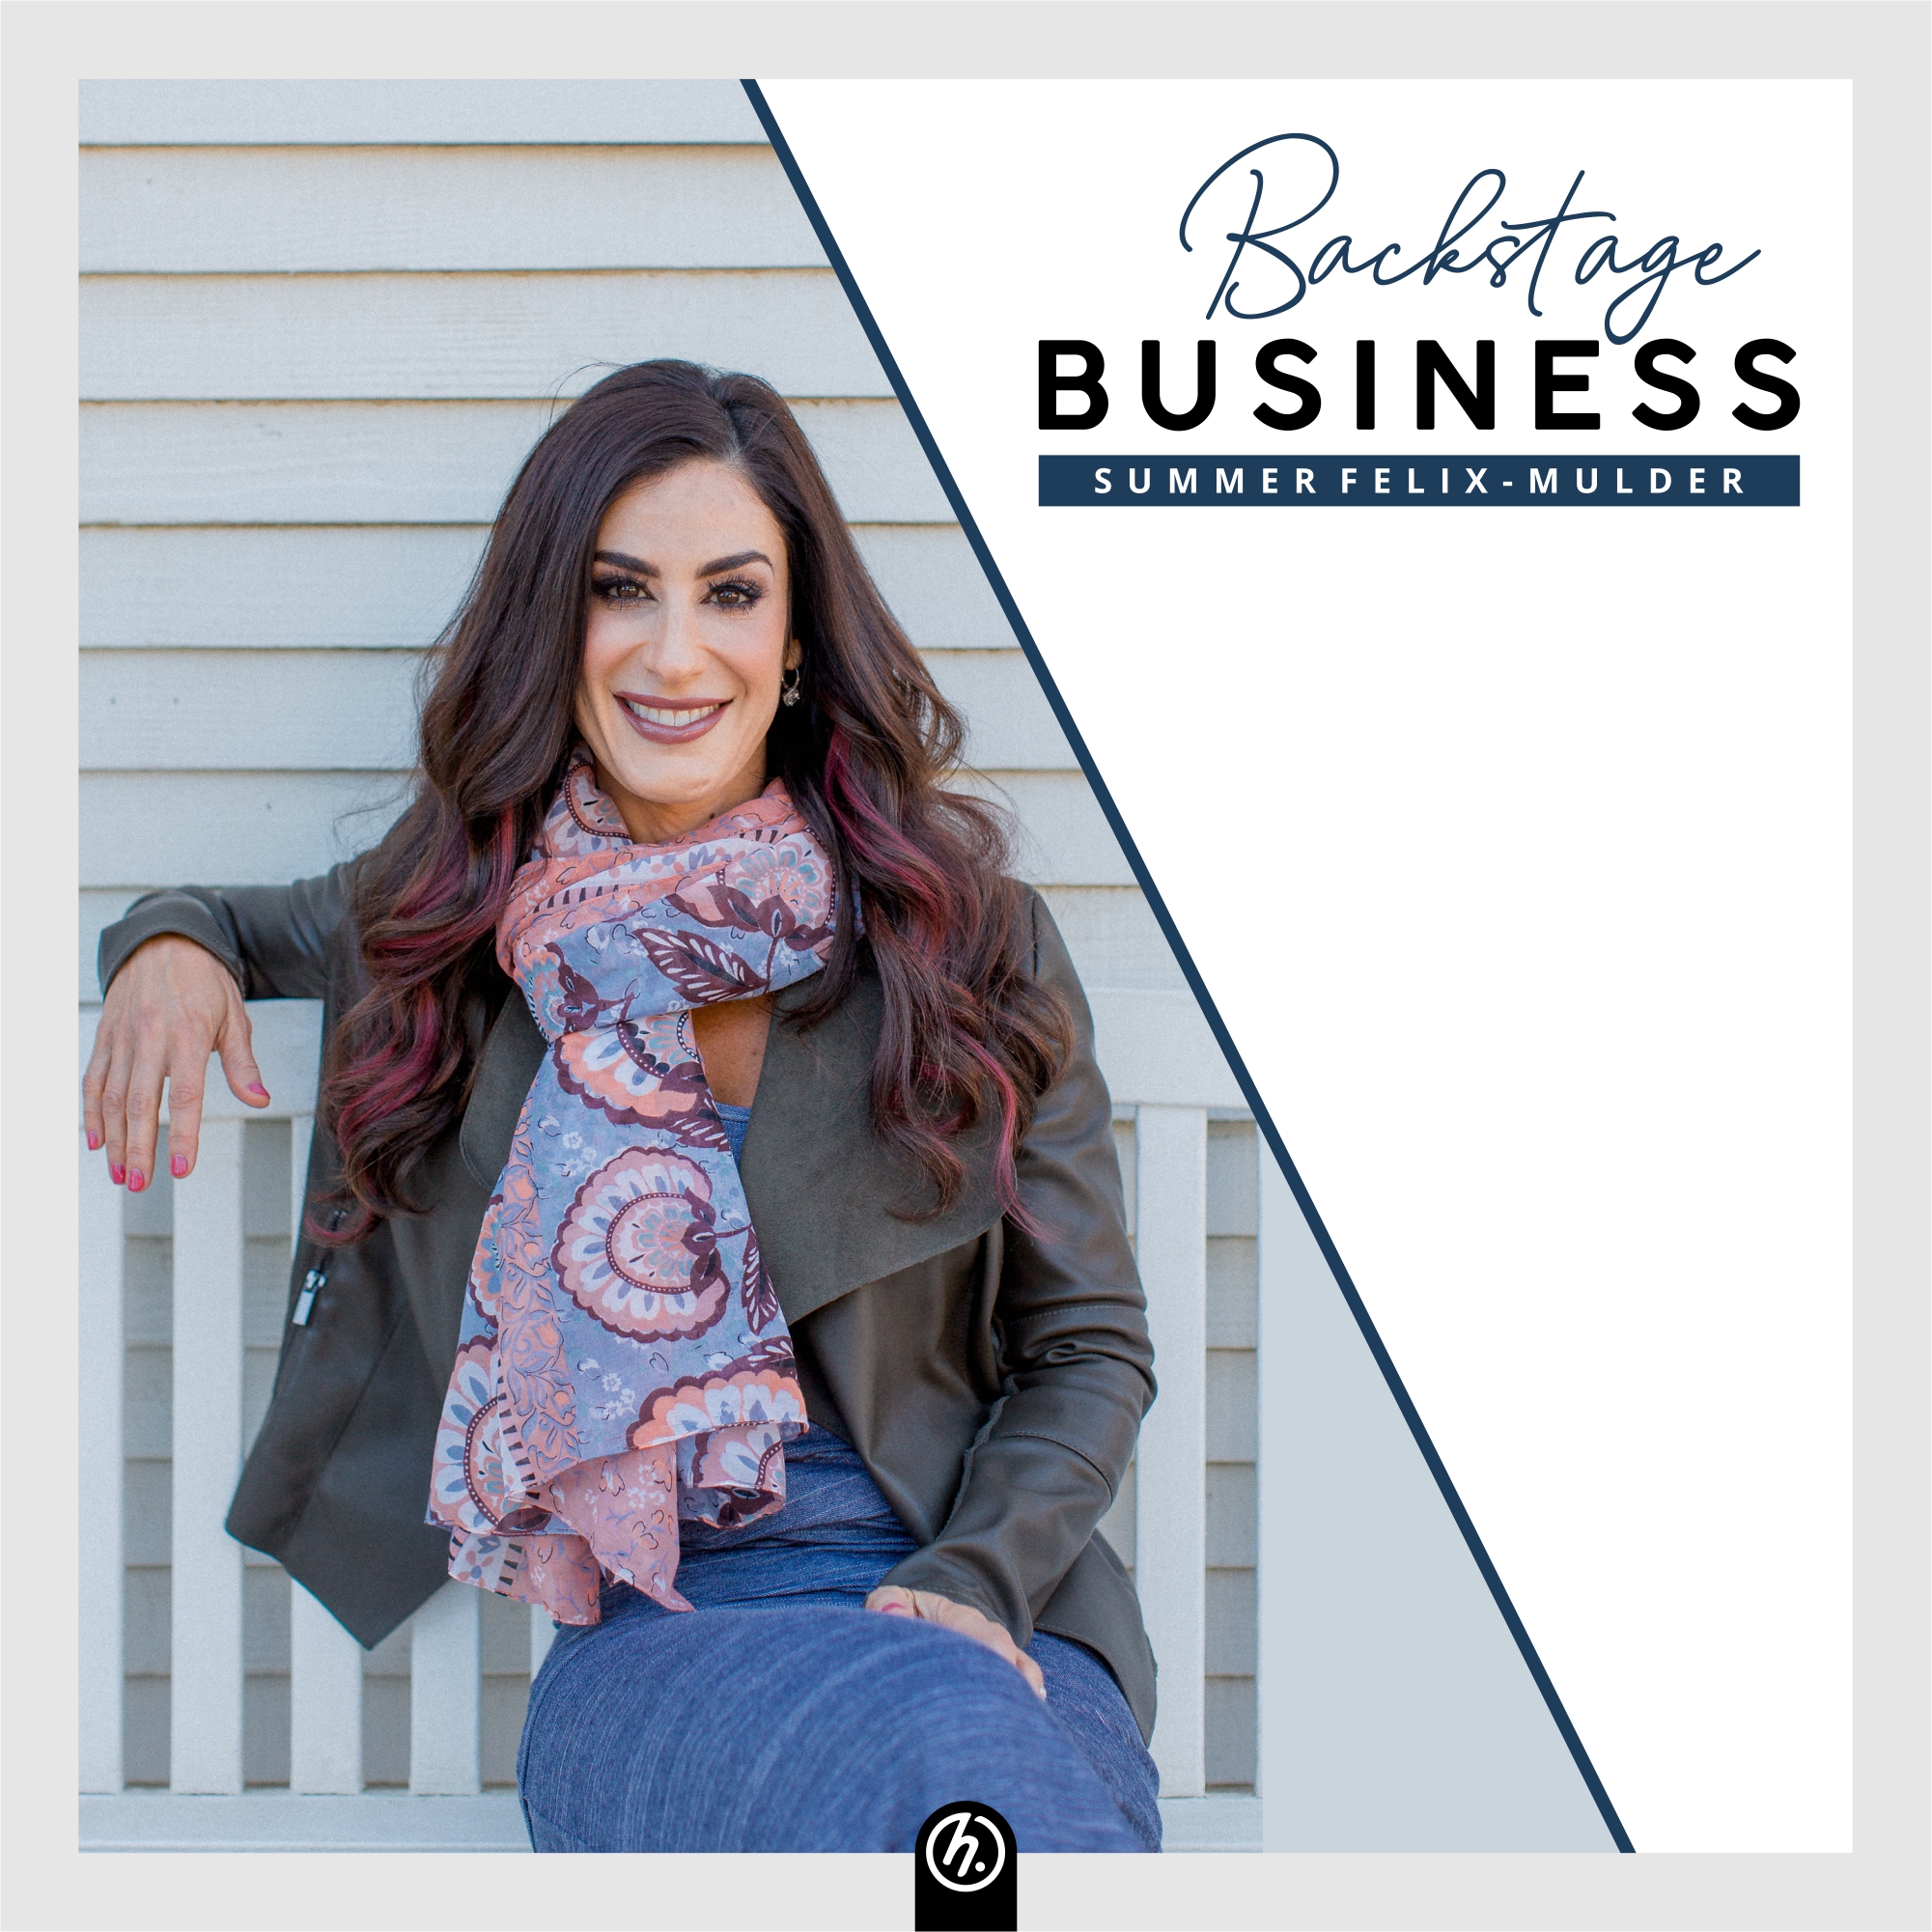 [Greatest Hits] Attracting New Business Through Podcasting with Kristin Molenaar - Backstage Business #72